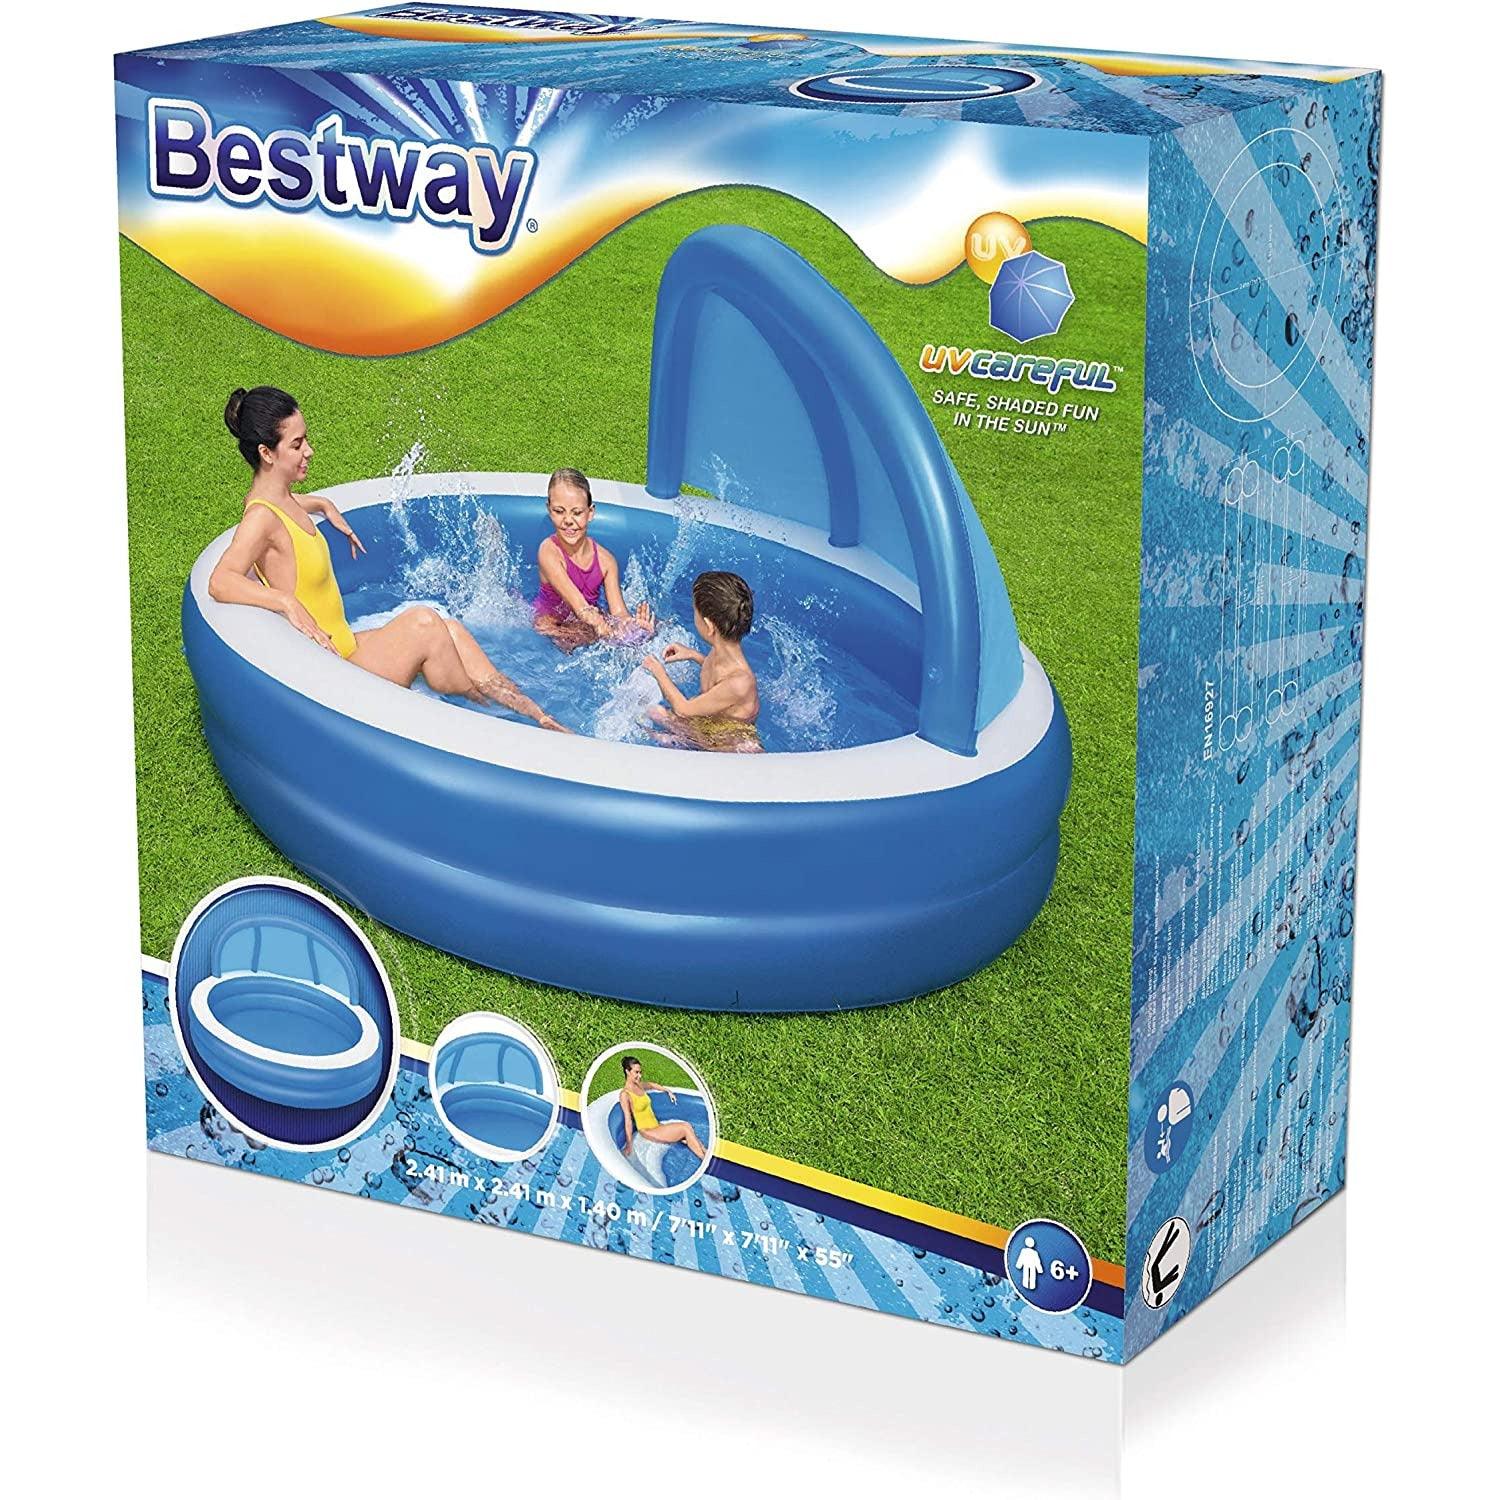 Bestway 54337 Swimming Pool With Sunshade 241 x 140 cm - BumbleToys - 5-7 Years, 8-13 Years, Bestway, Boys, Floaters, Girls, Sand Toys Pools & Inflatables